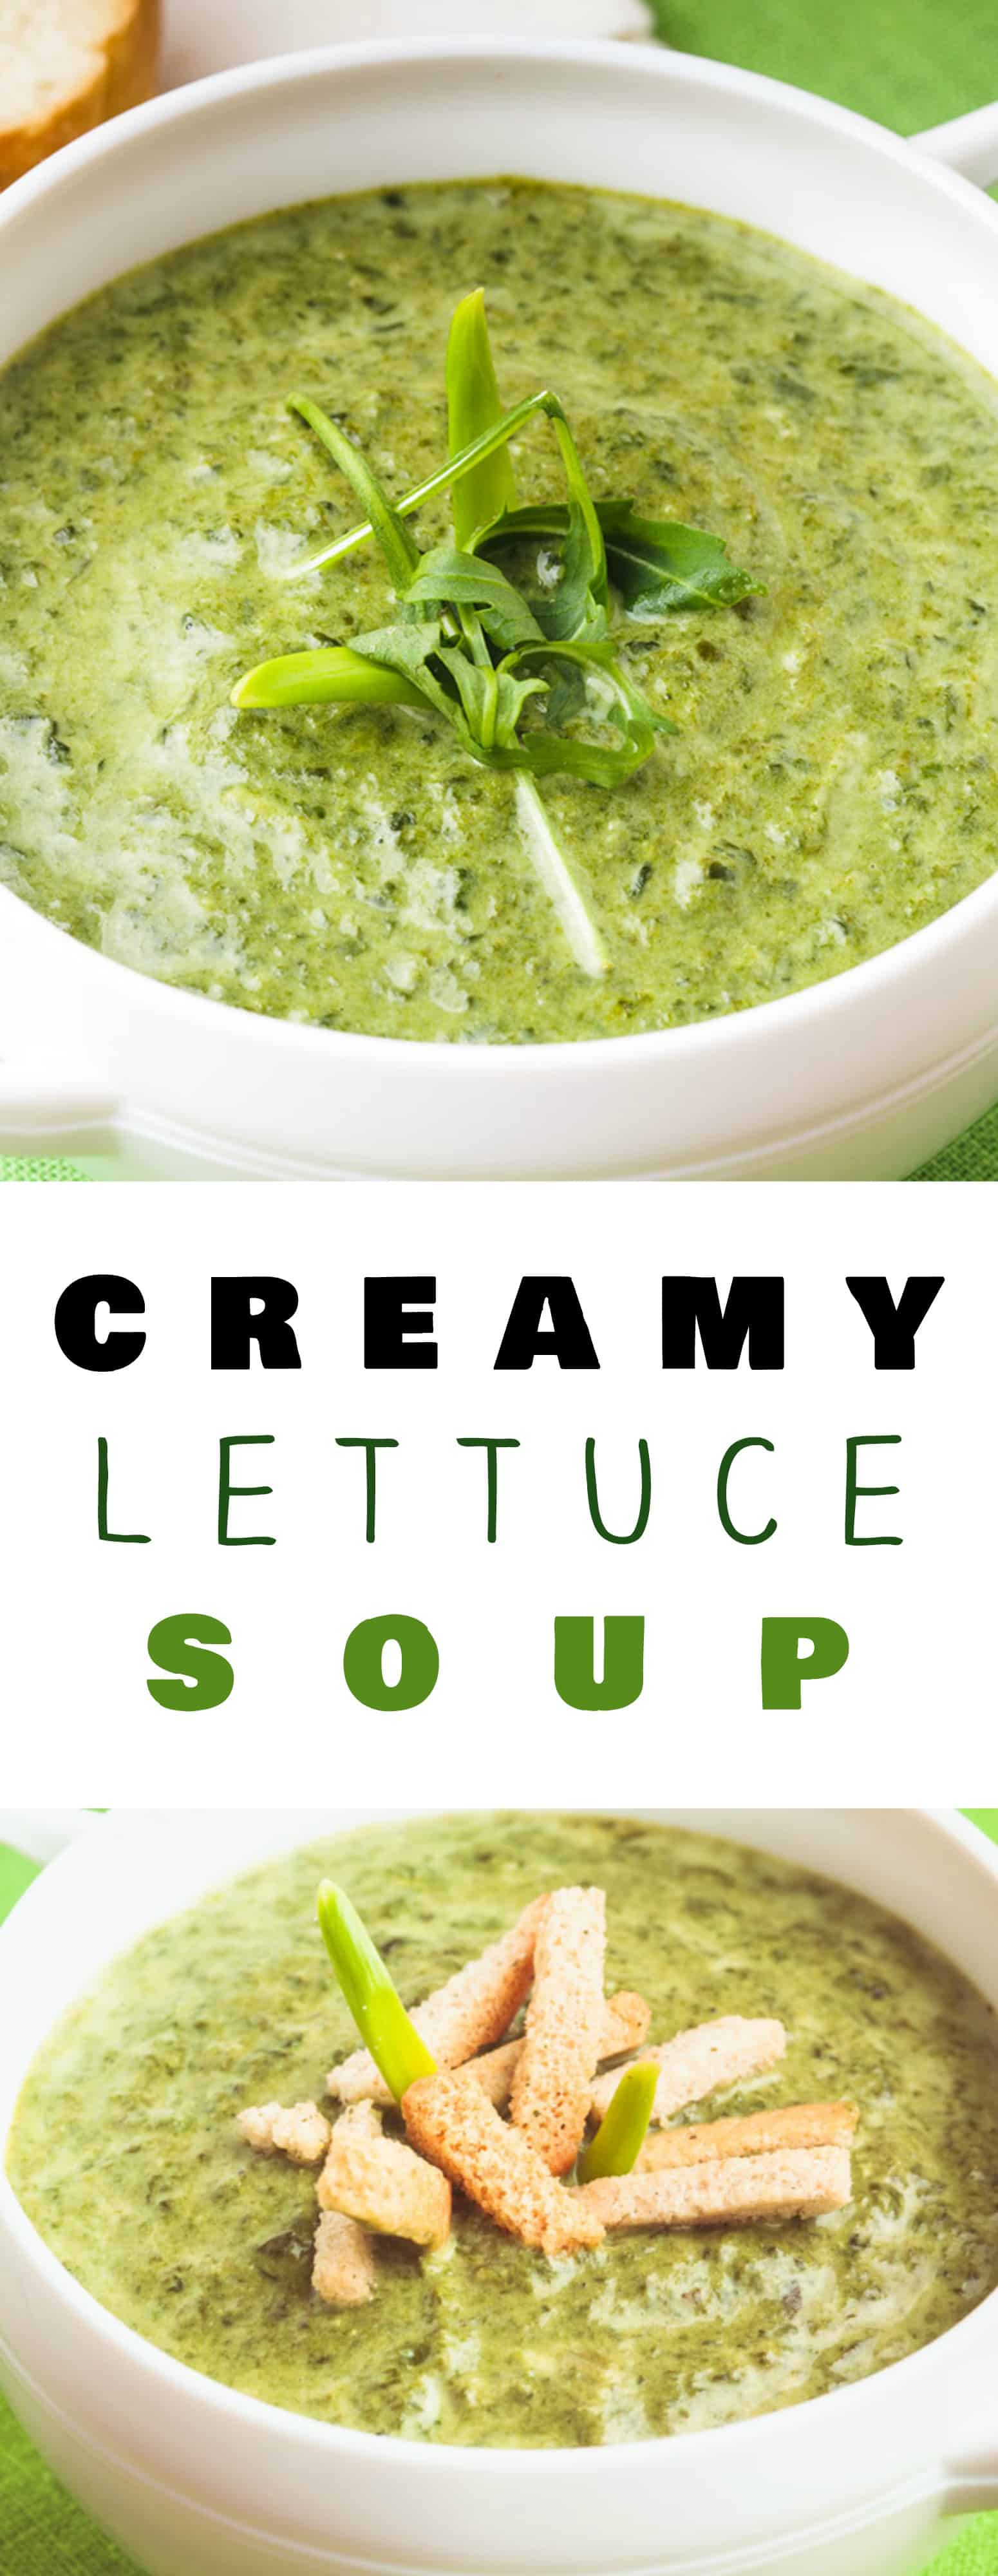 Creamy Lettuce Soup is a delicious, healthy recipe that uses 1 head of lettuce. Combined with heavy cream, chicken broth and spices, this is a great way to add lettuce to your diet! I love using Bibb lettuce in this recipe but Romaine and Iceberg work good too! Who knew cooked lettuce could taste so yummy for dinner - even kids love it!